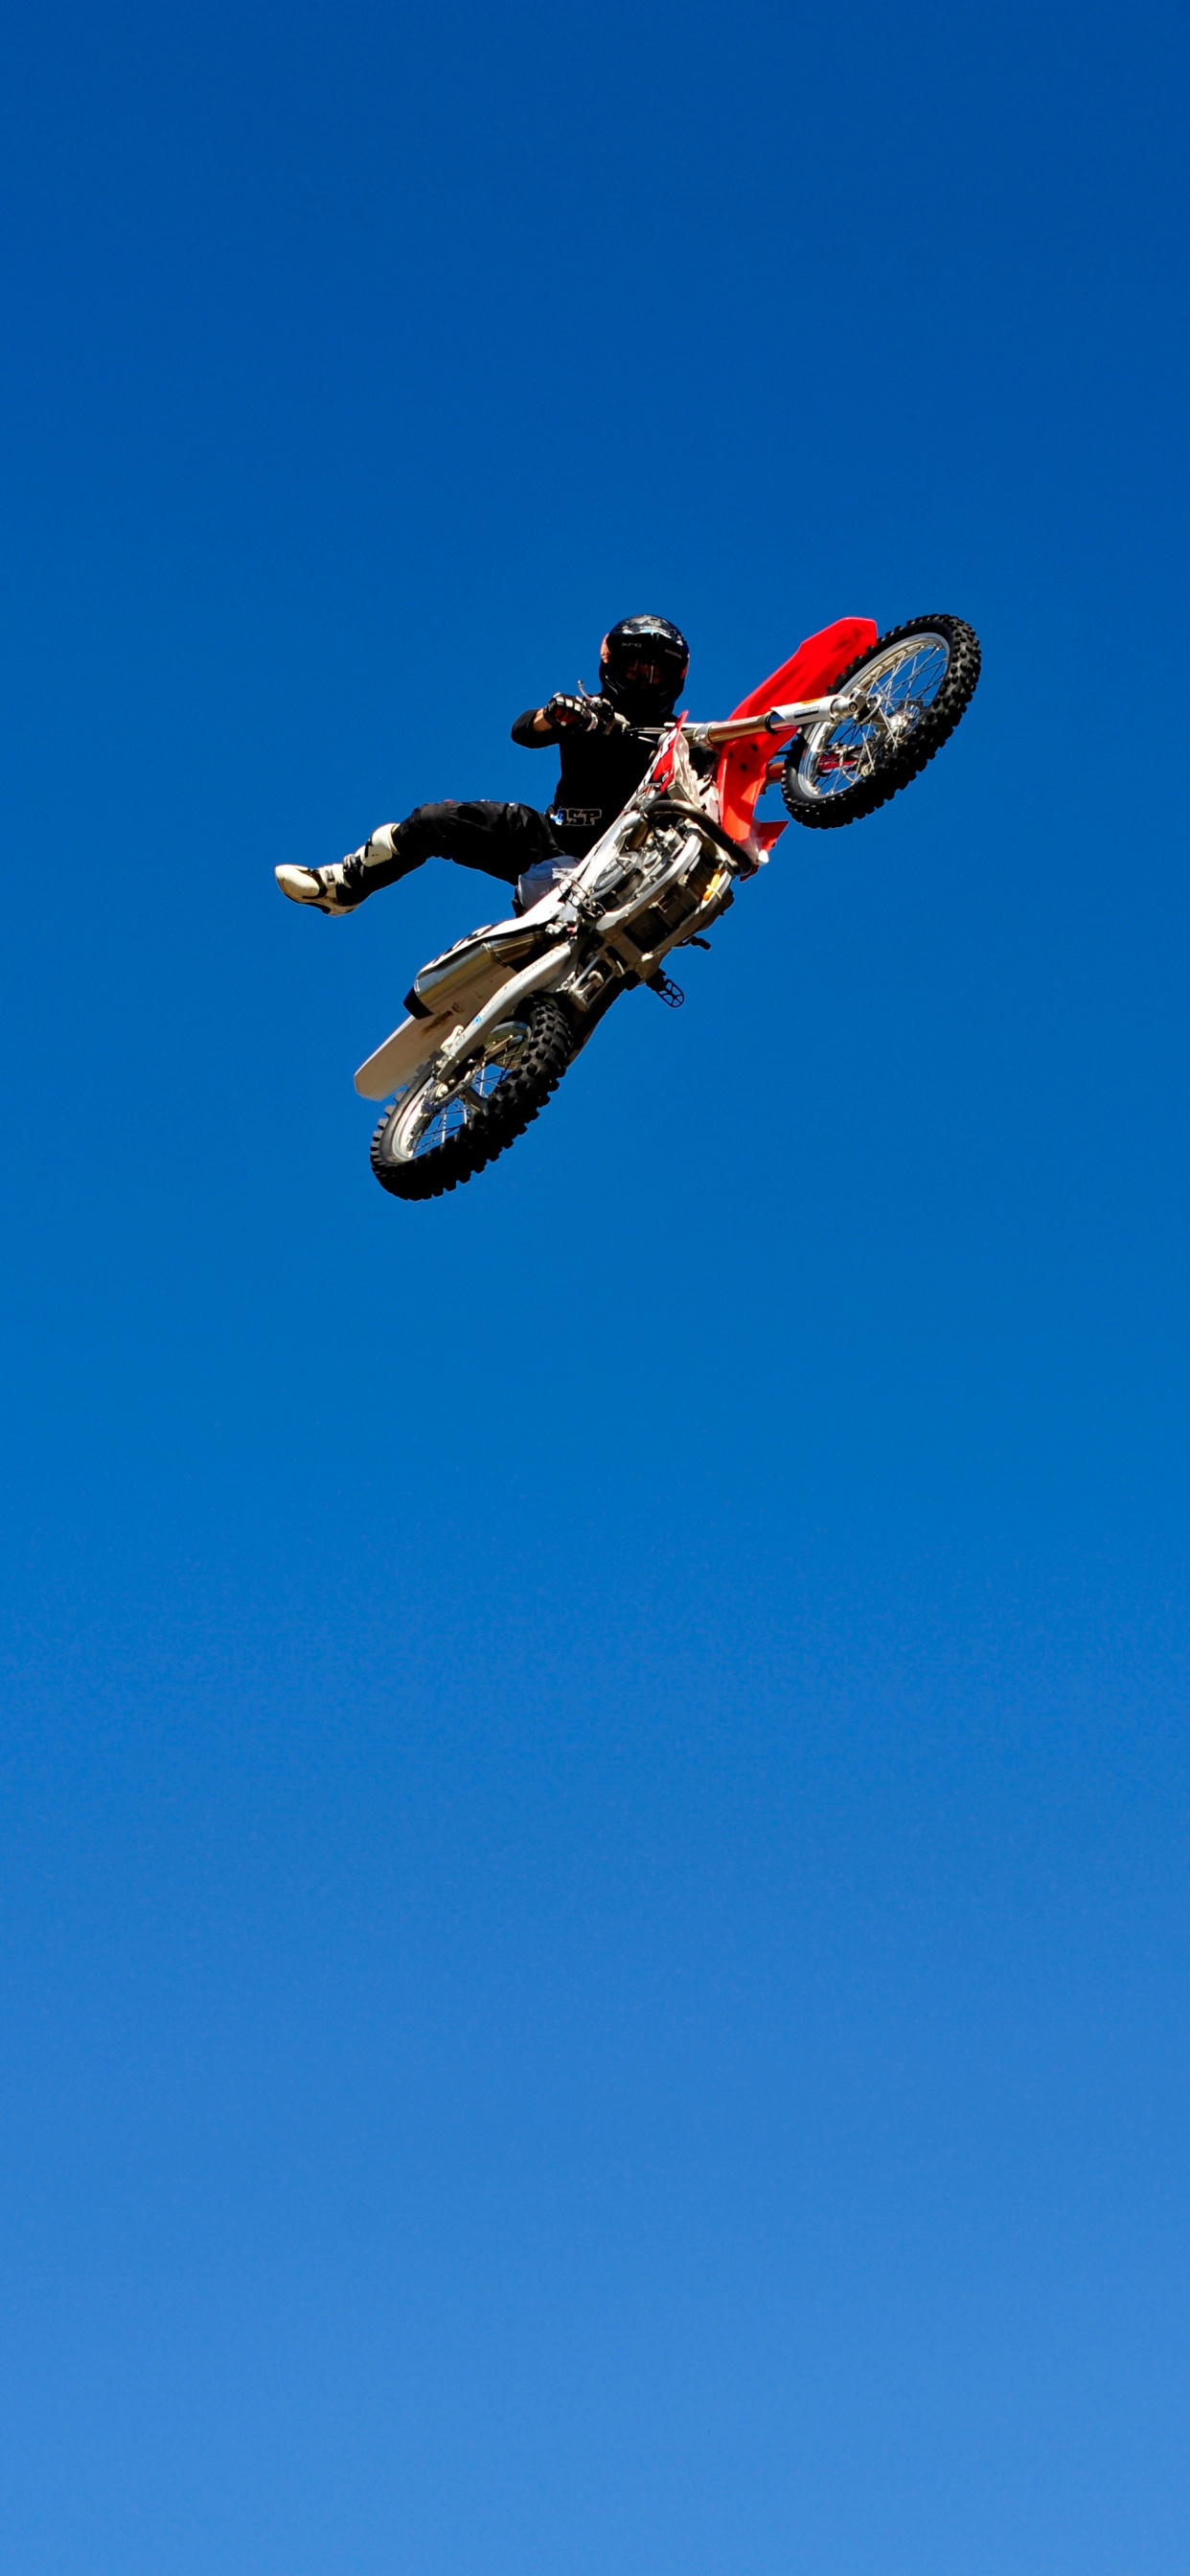 Man in Red and Black Motocross Suit Riding Red and White Motocross Dirt Bike. Wallpaper in 1242x2688 Resolution